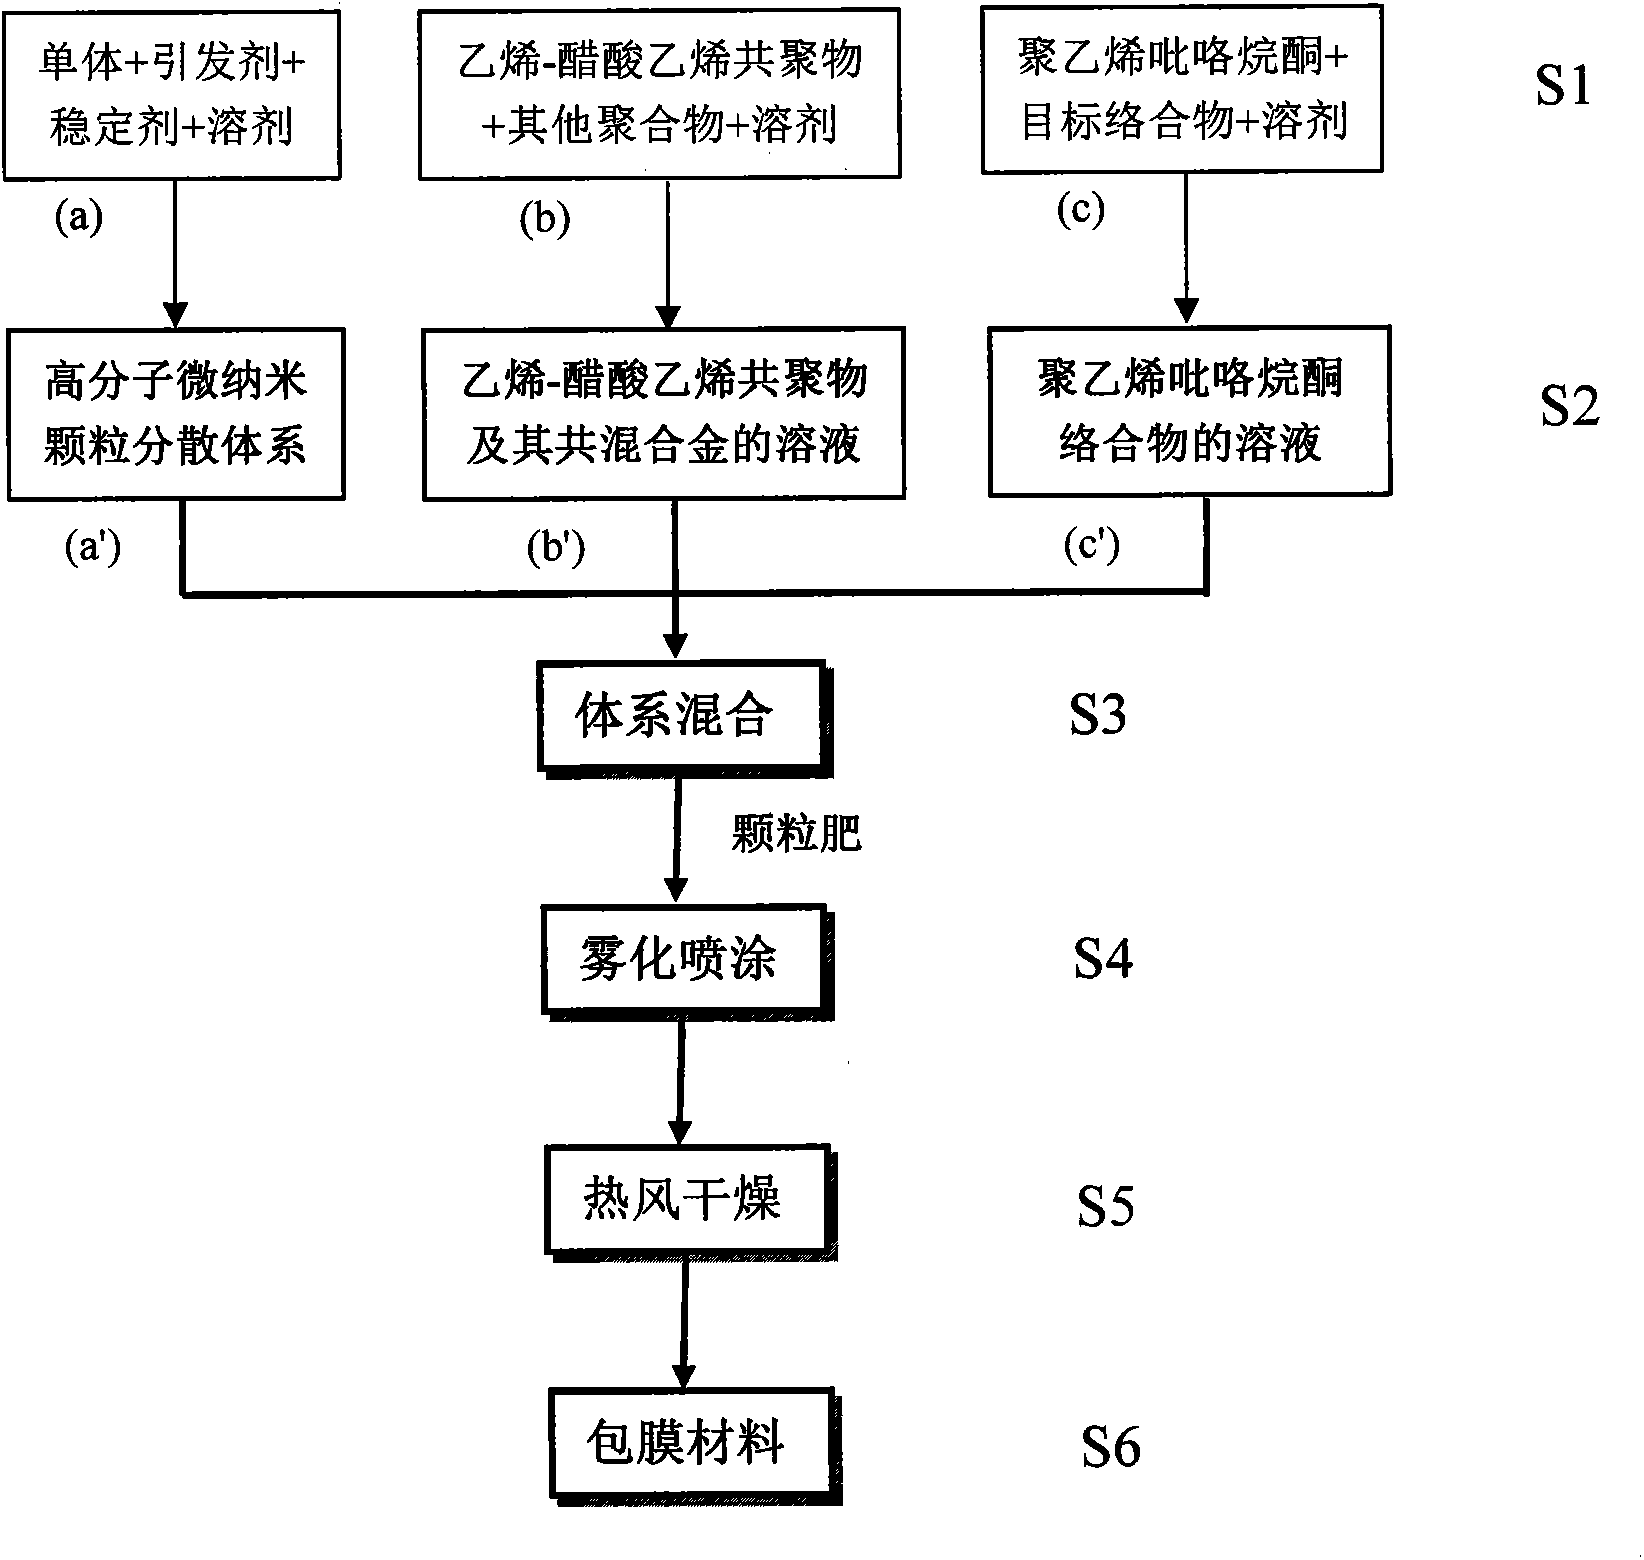 Preparation method of sustained and controlled release coated material from polymer micro-nano particles employing embedding method